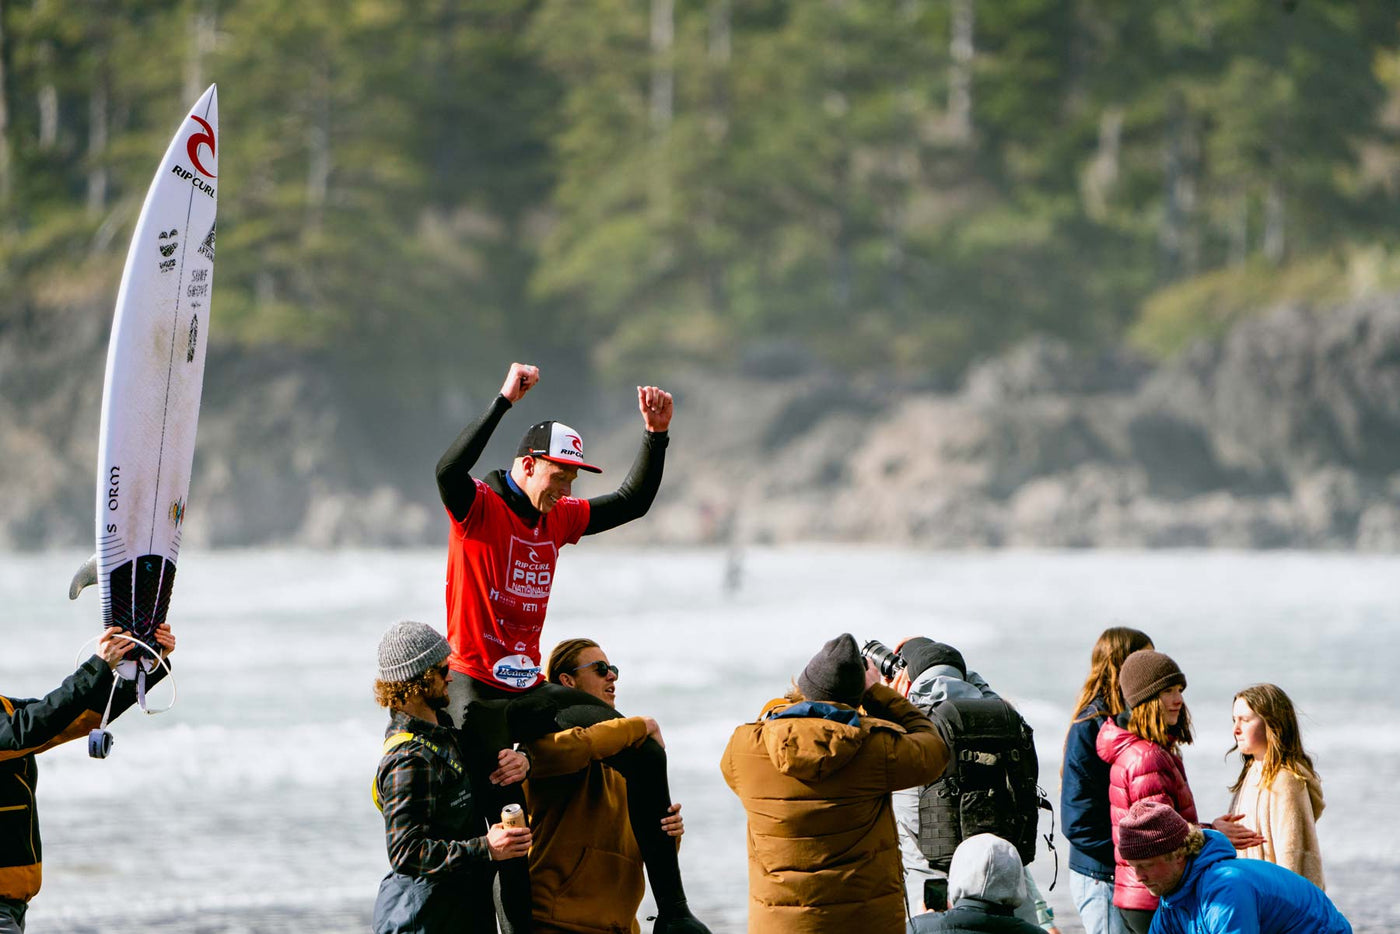 2022 Rip Curl Pro Nationals Presented By Red Bull & Heineken 0.0 – CSA Surf  Canada